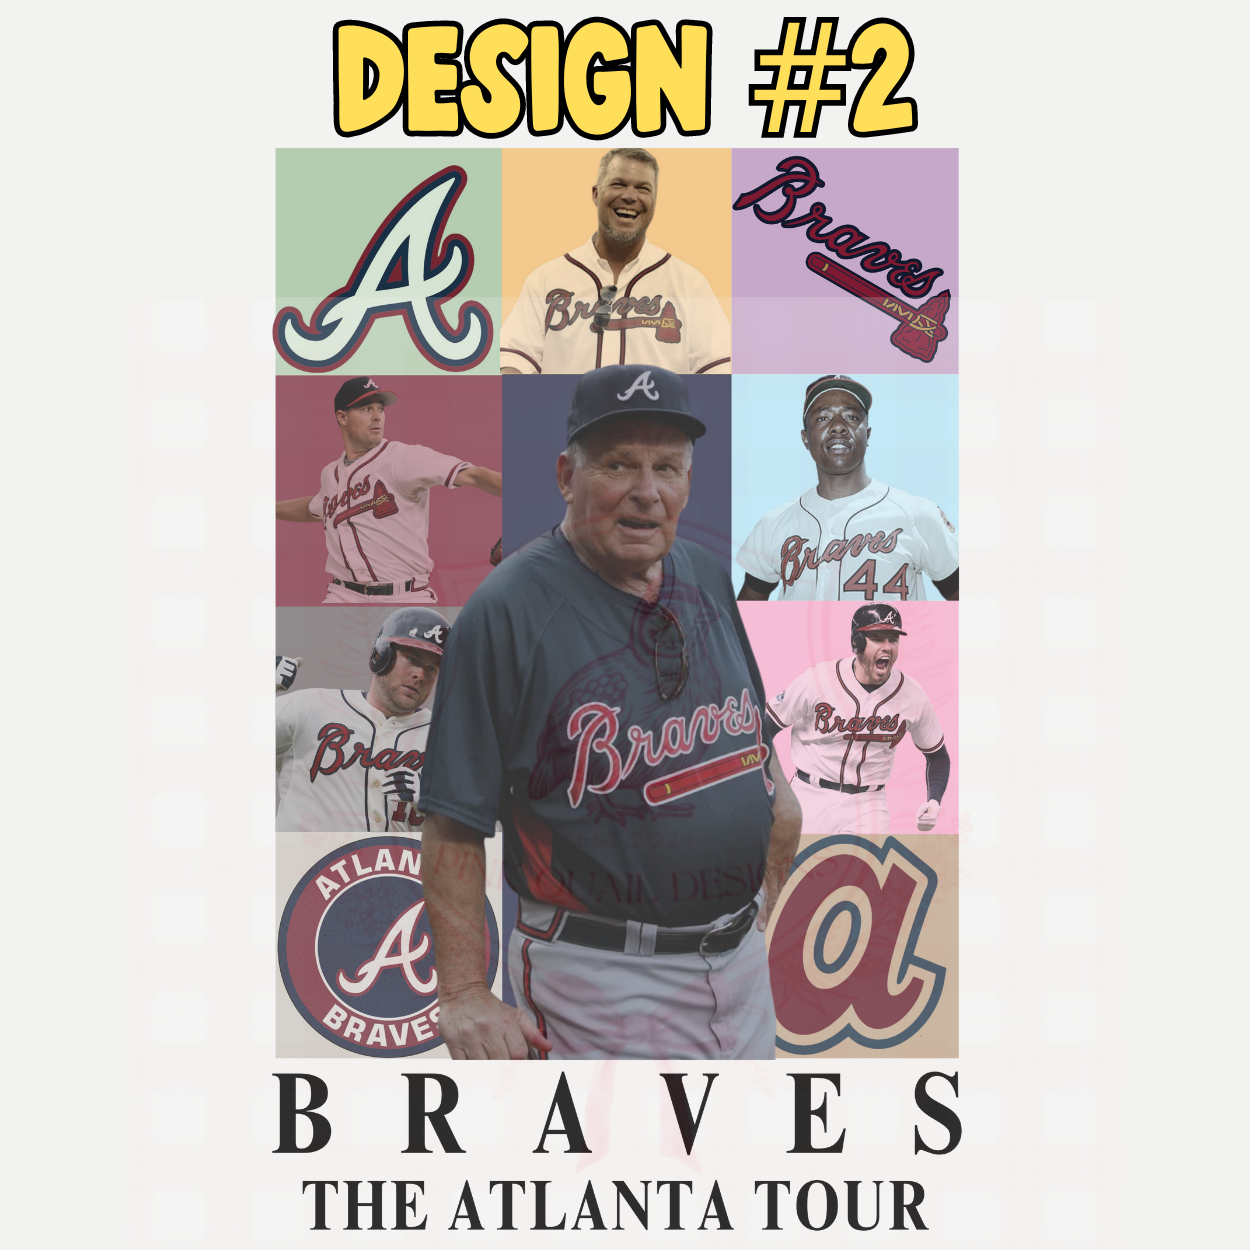 BRAVES COLLECTION 11 designs!!!